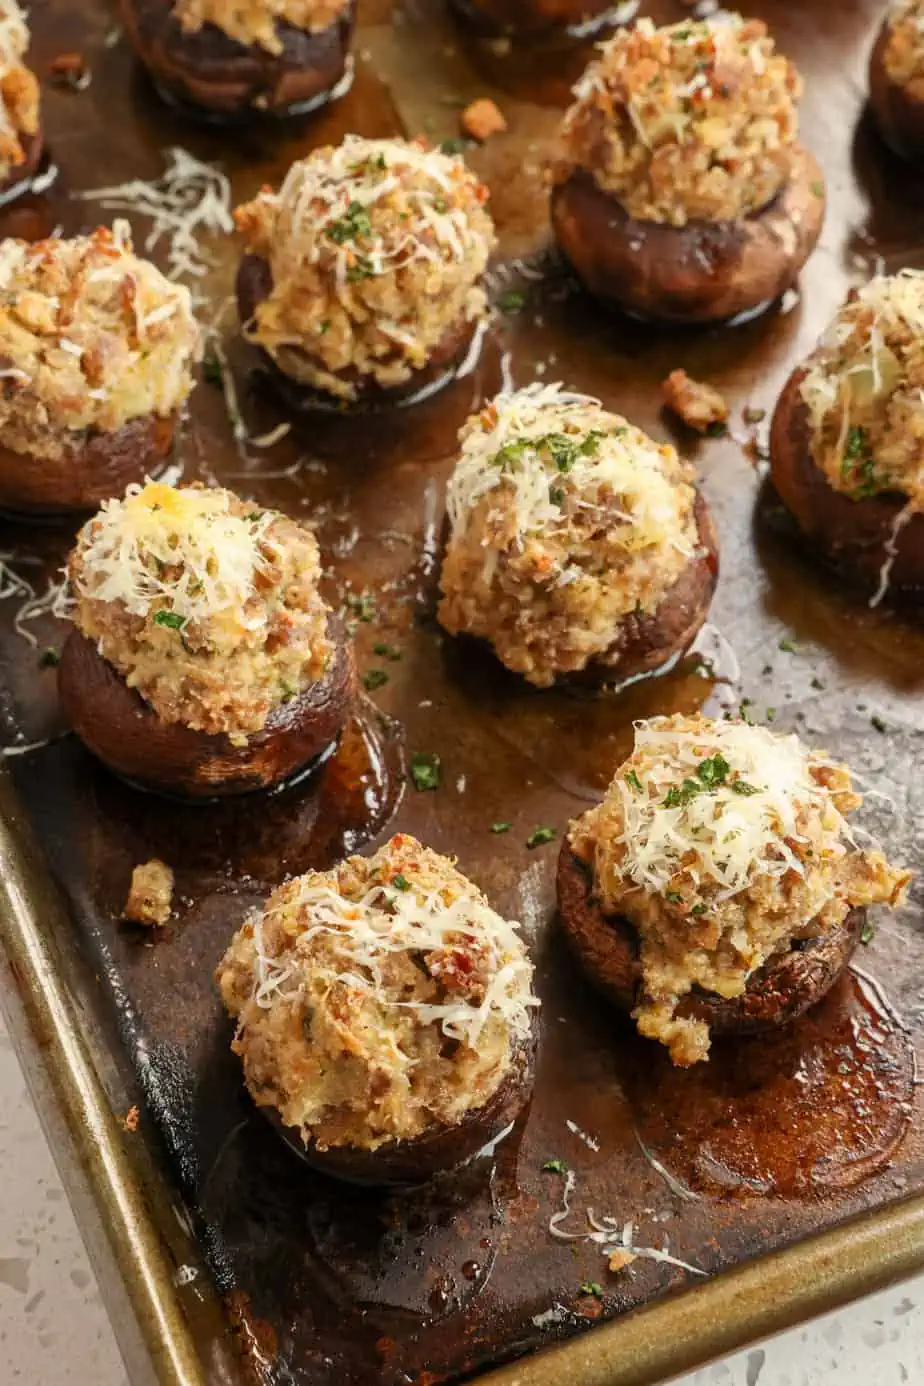 A flavorful tray of ground sausage-stuffed mushrooms.